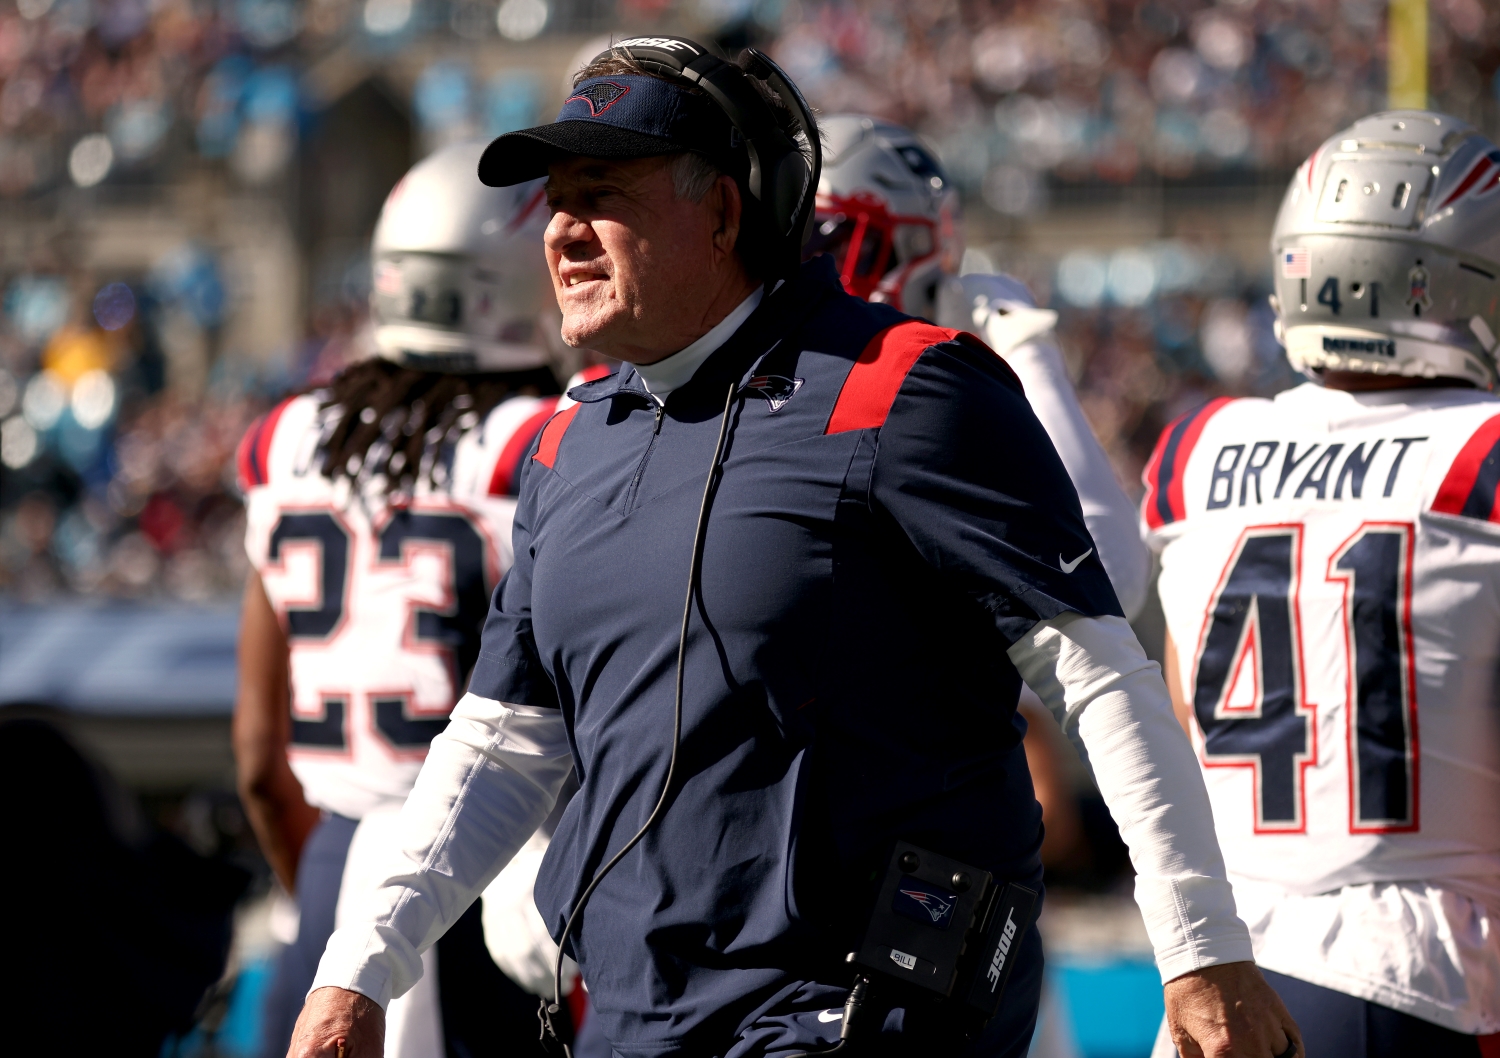 New England Patriots head coach Bill Belichick turns to talk to his team during a game.